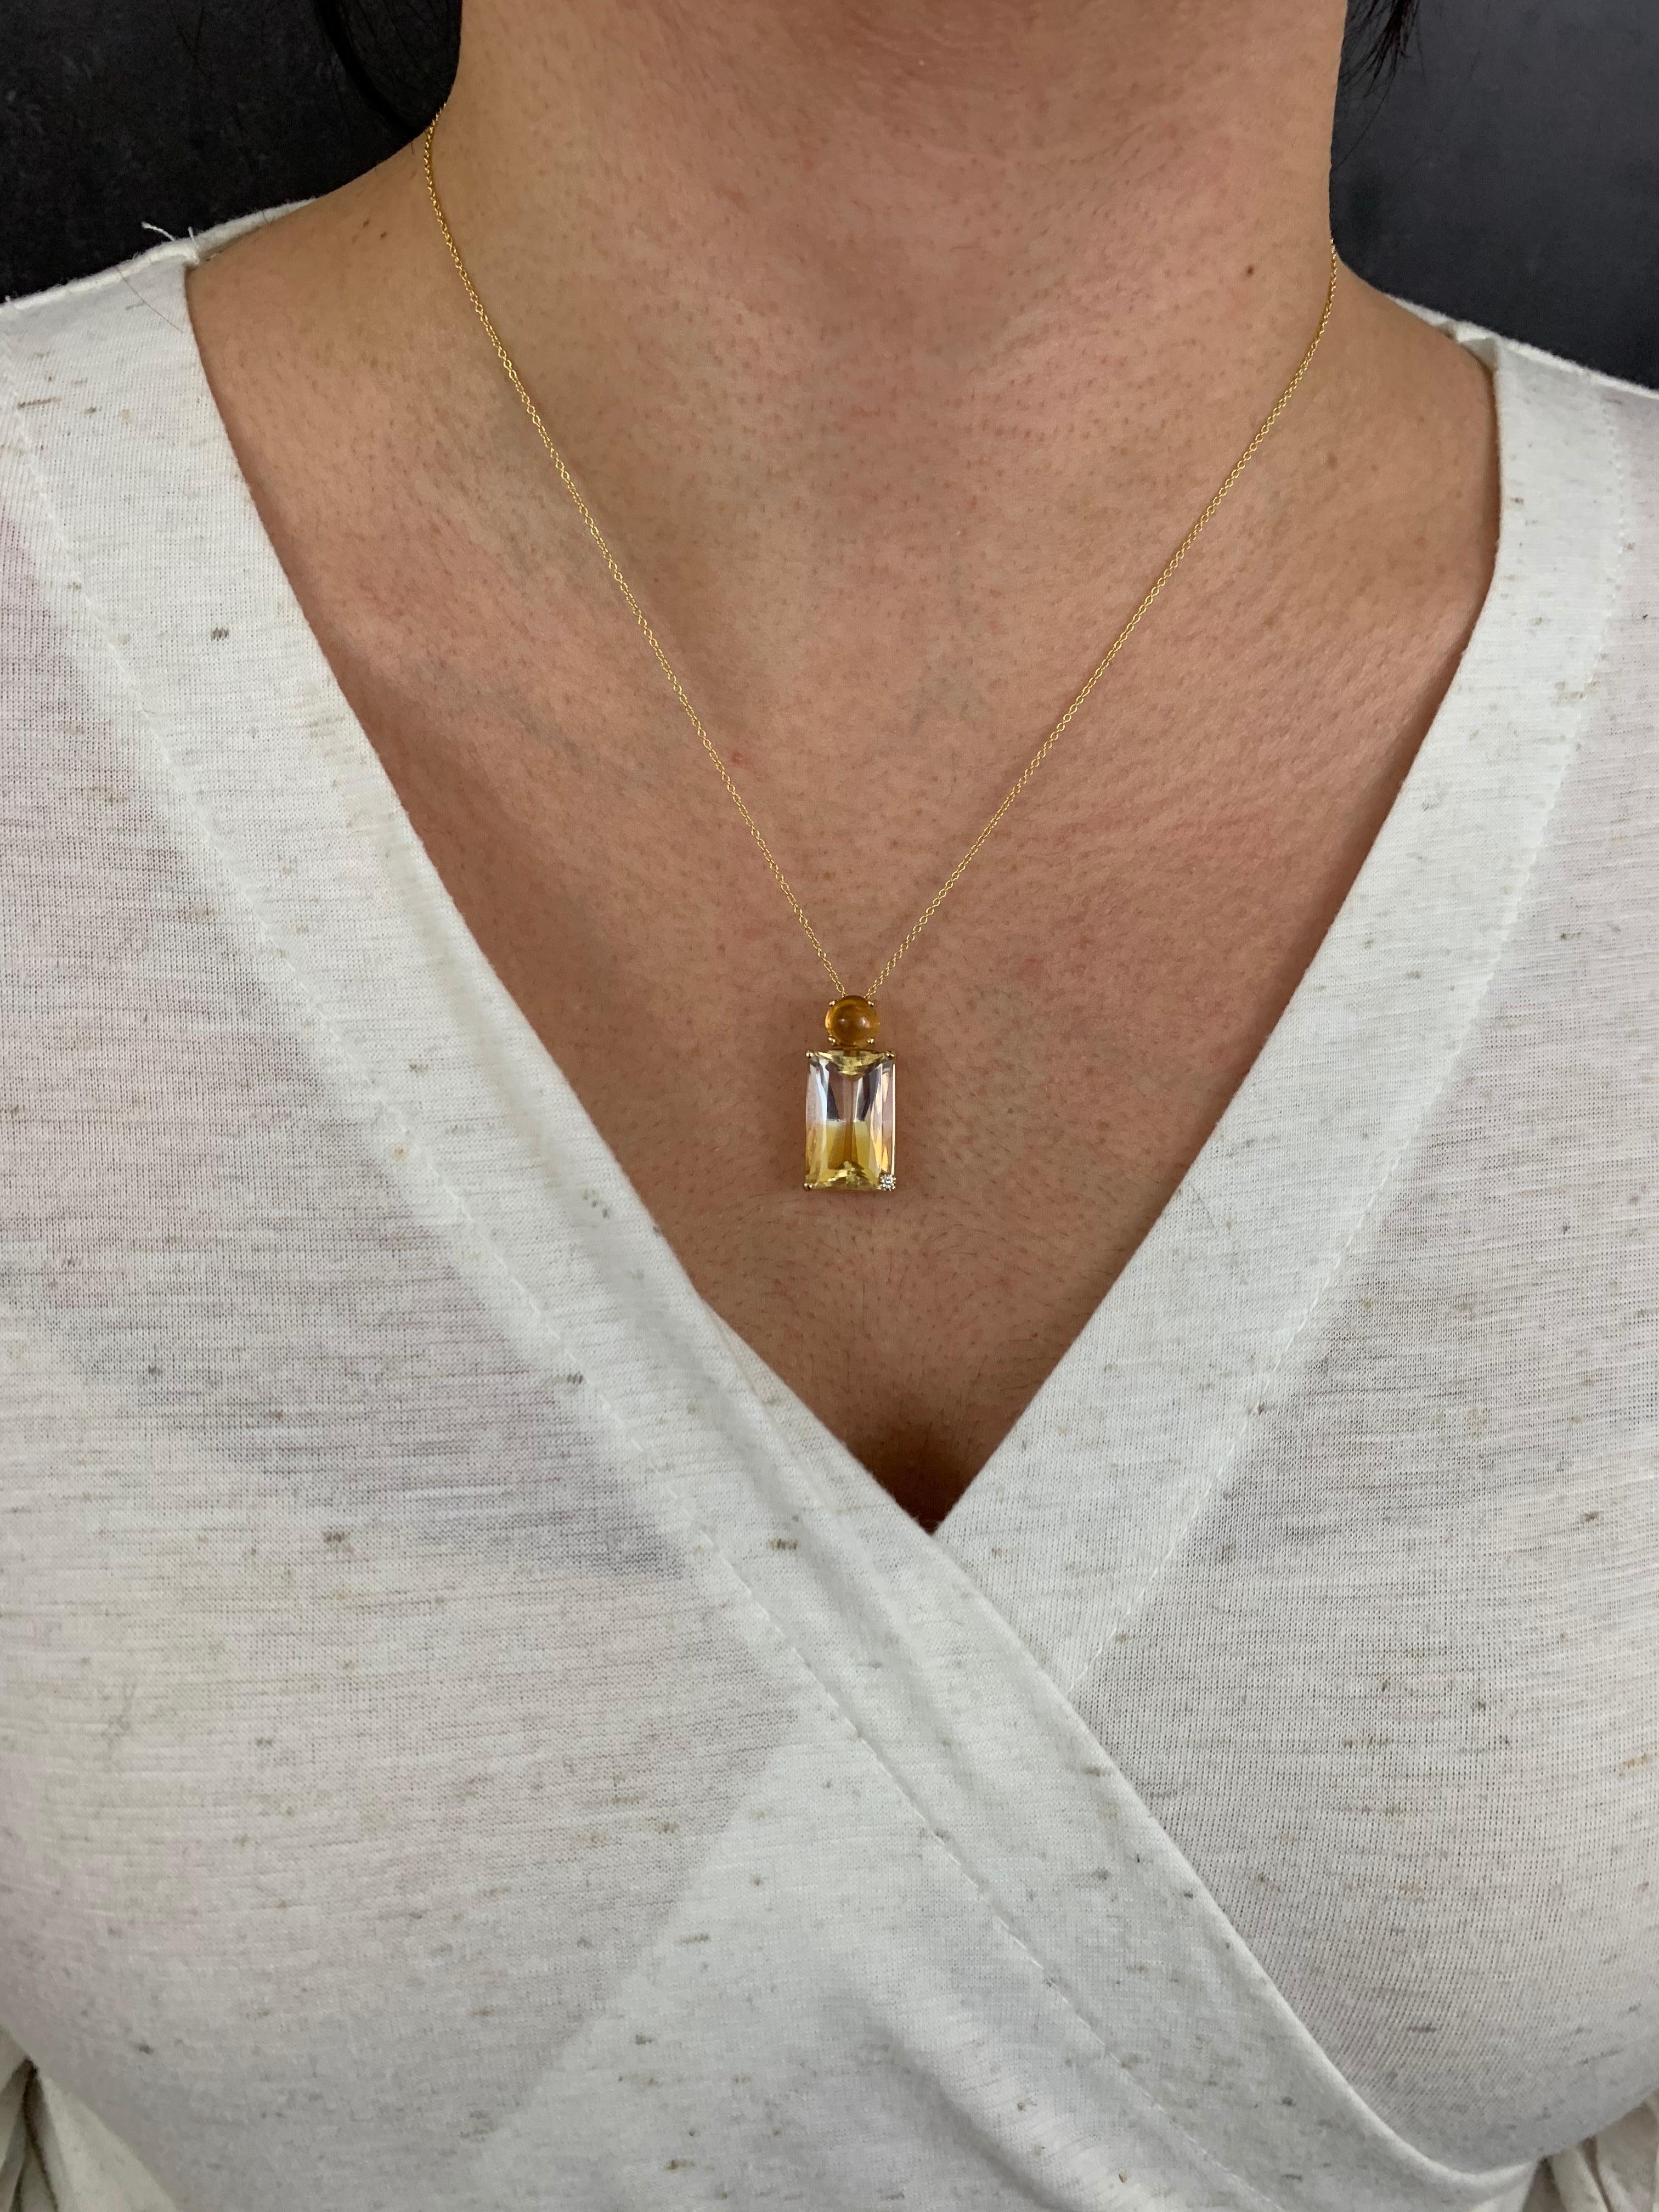 14K Yellow Gold
1 Emerald Cut Bi-Color Citrine at 13.50 Carats- Measuring 11.6 x 18.7 mm
1 Round Citrine at 1.85 Carats
1 Round White Diamond at 0.02 Carats - Clarity: SI / Color: H-I

Fine one-of-a-kind craftsmanship meets incredible quality in